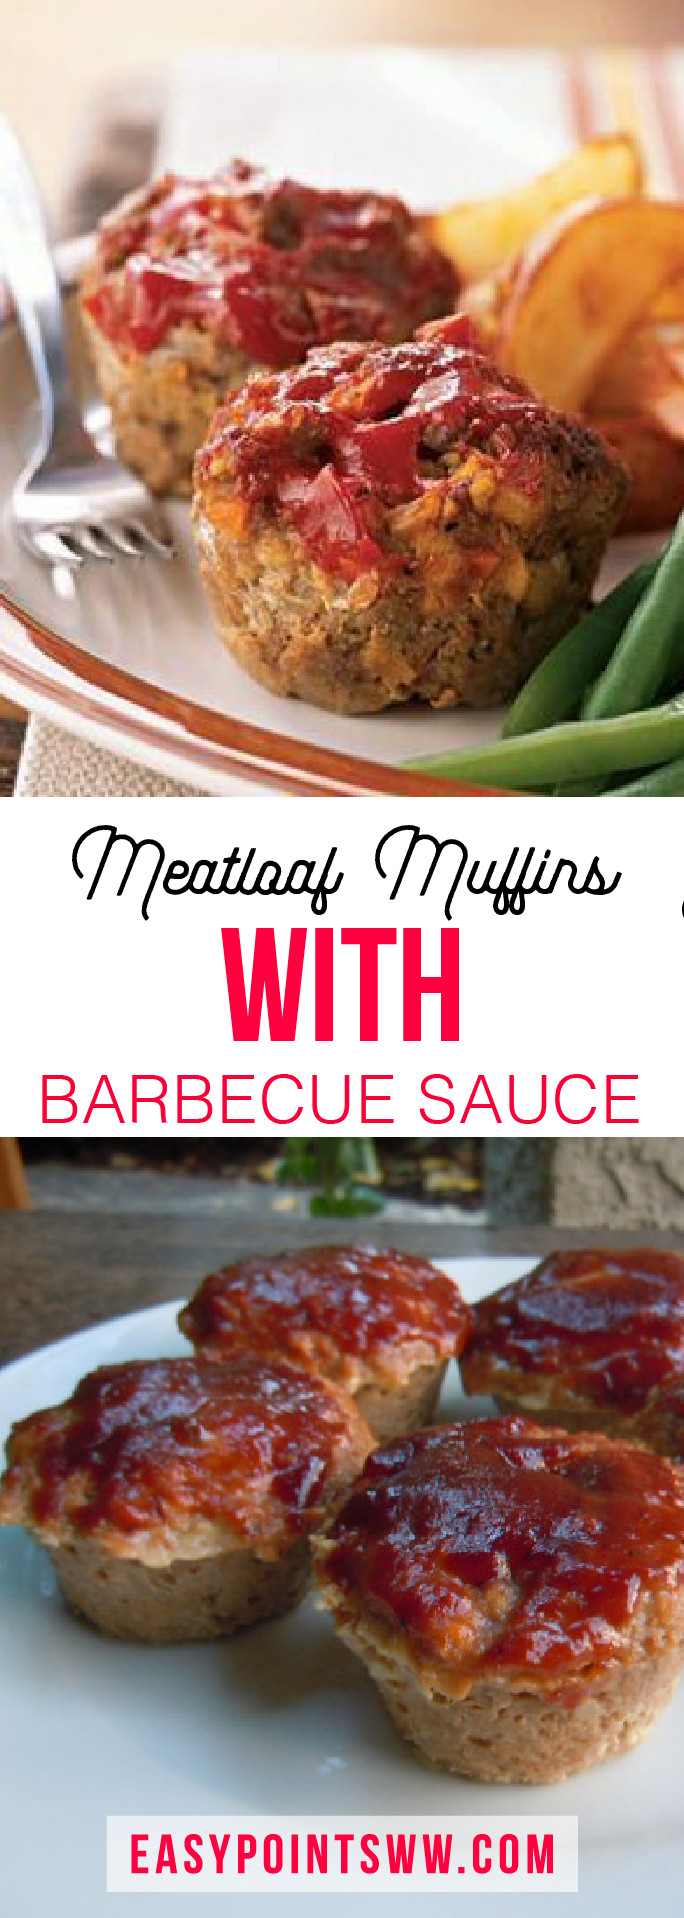 Weight Watchers Meatloaf Muffins
 Meatloaf Muffins with Barbecue Sauce